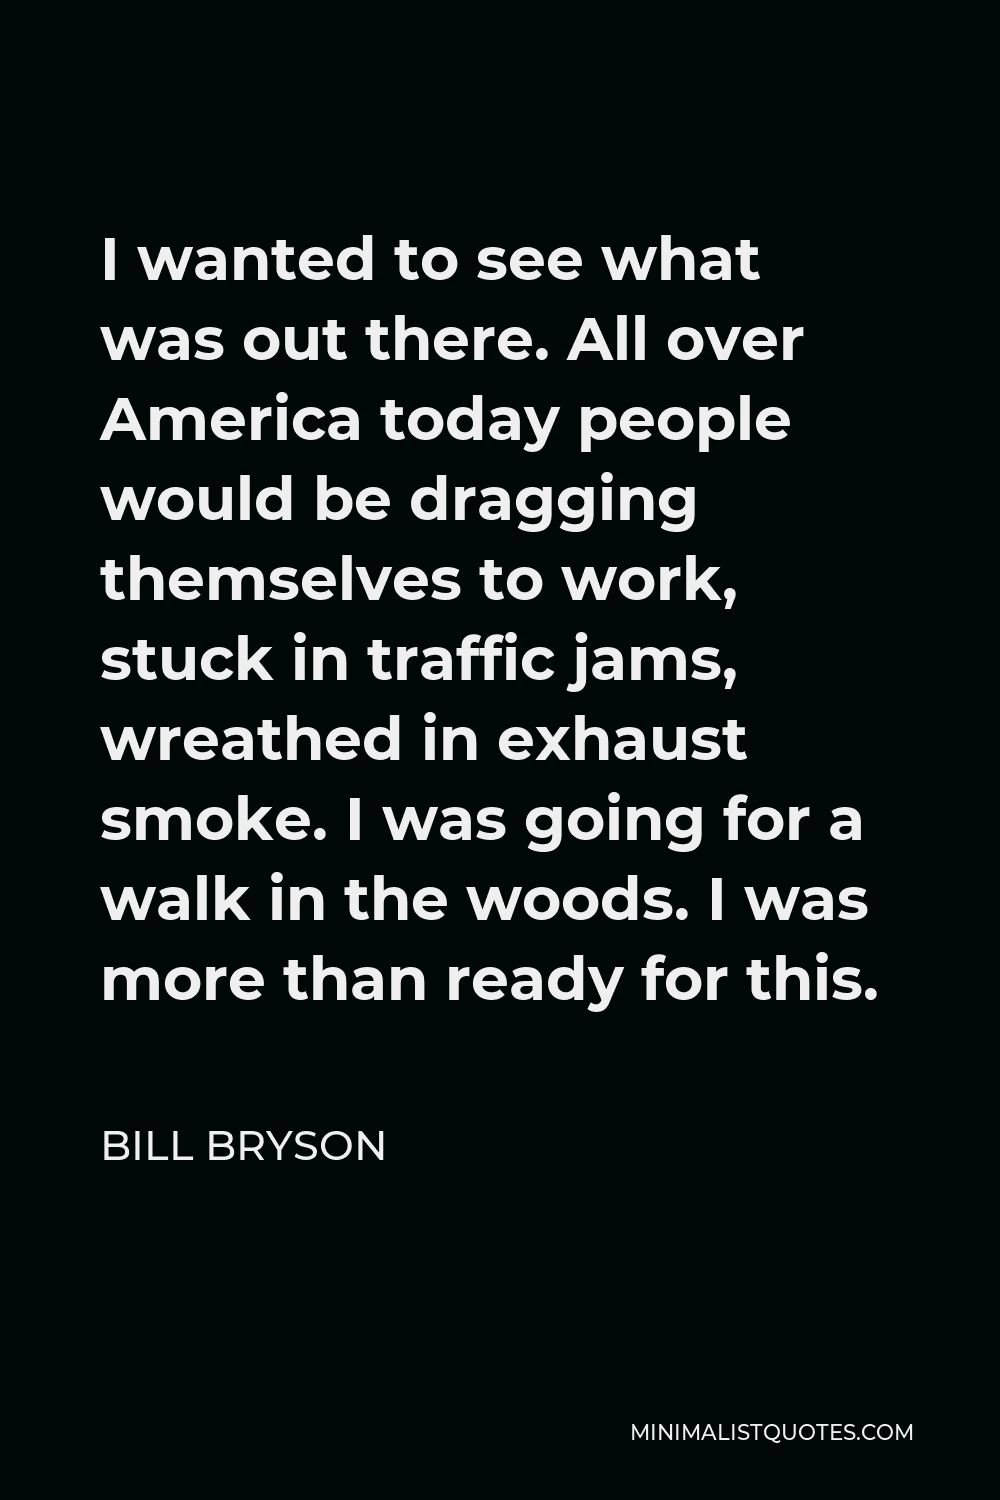 Bill Bryson Quote - I wanted to see what was out there. All over America today people would be dragging themselves to work, stuck in traffic jams, wreathed in exhaust smoke. I was going for a walk in the woods. I was more than ready for this.